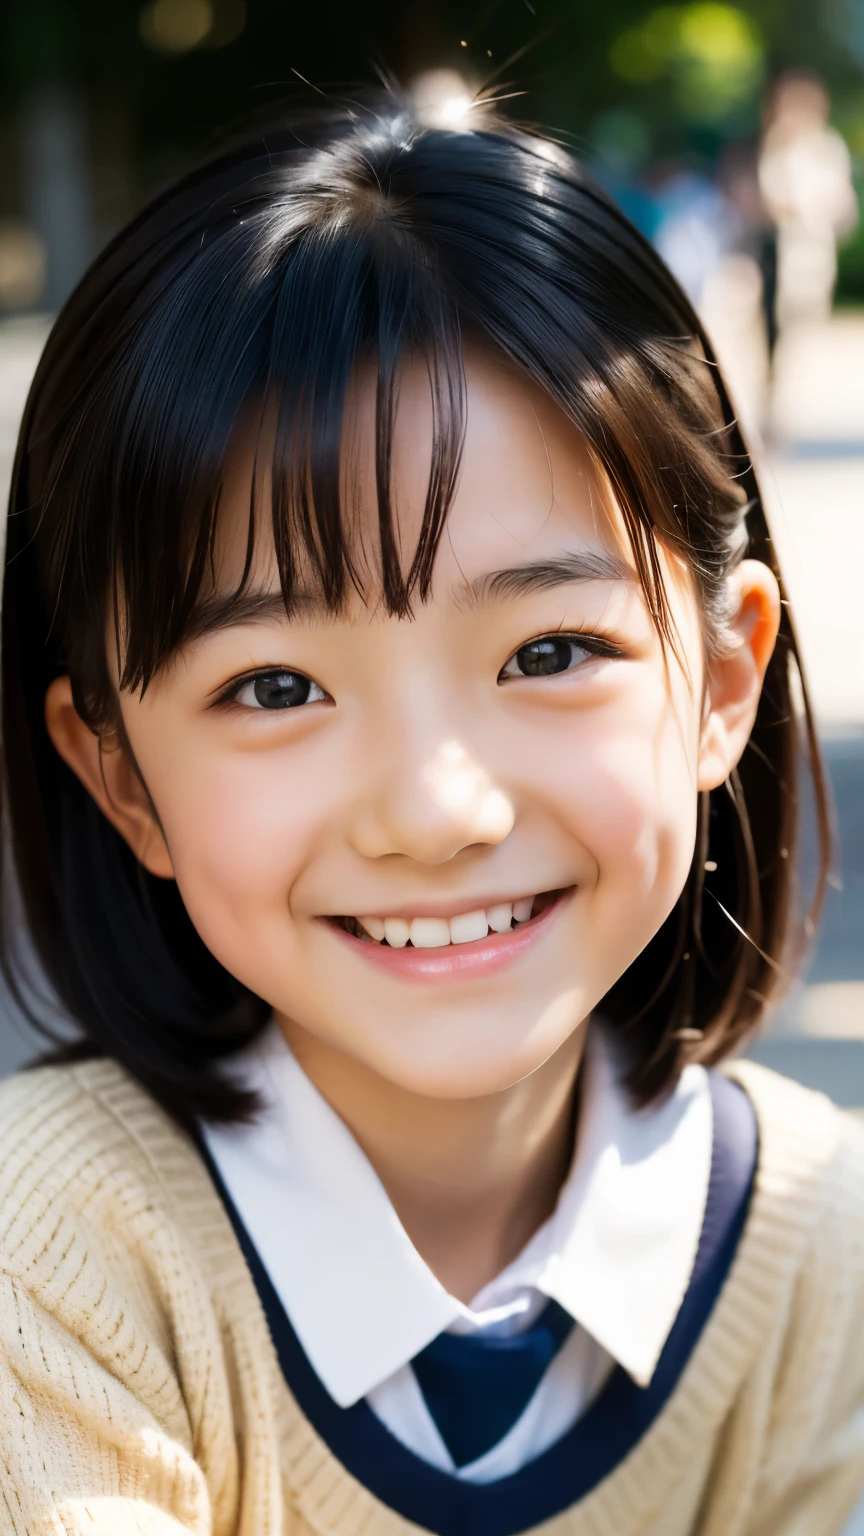 lens: 135mm f1.8, (highest quality),(RAW Photos), (Tabletop:1.1), (Beautiful 8 year old Japanese girl), Cute face, (Deeply chiseled face:0.7), (freckles:0.4), dappled sunlight, Dramatic lighting, (Japanese School Uniform), (On campus), shy, (Close-up shot:1.2), (smile),, (Sparkling eyes)、(sunlight)